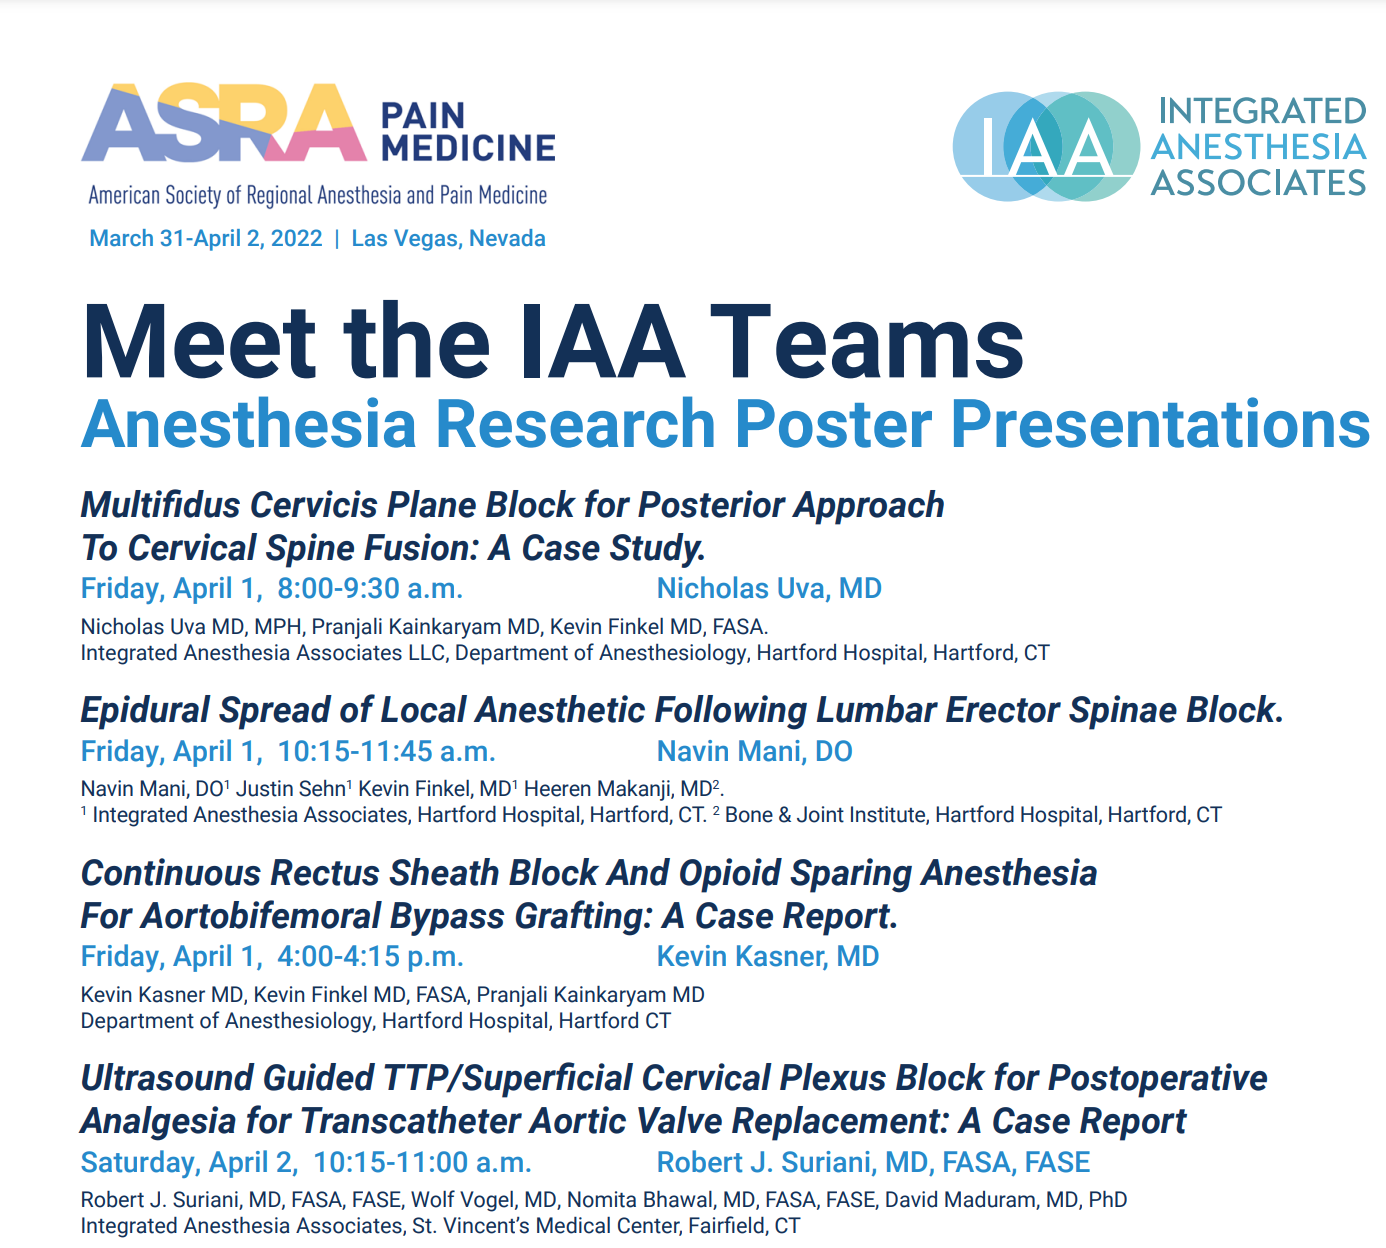 IAA Researchers to Present at ASRA Spring 2022, Caesar's Palace, Las